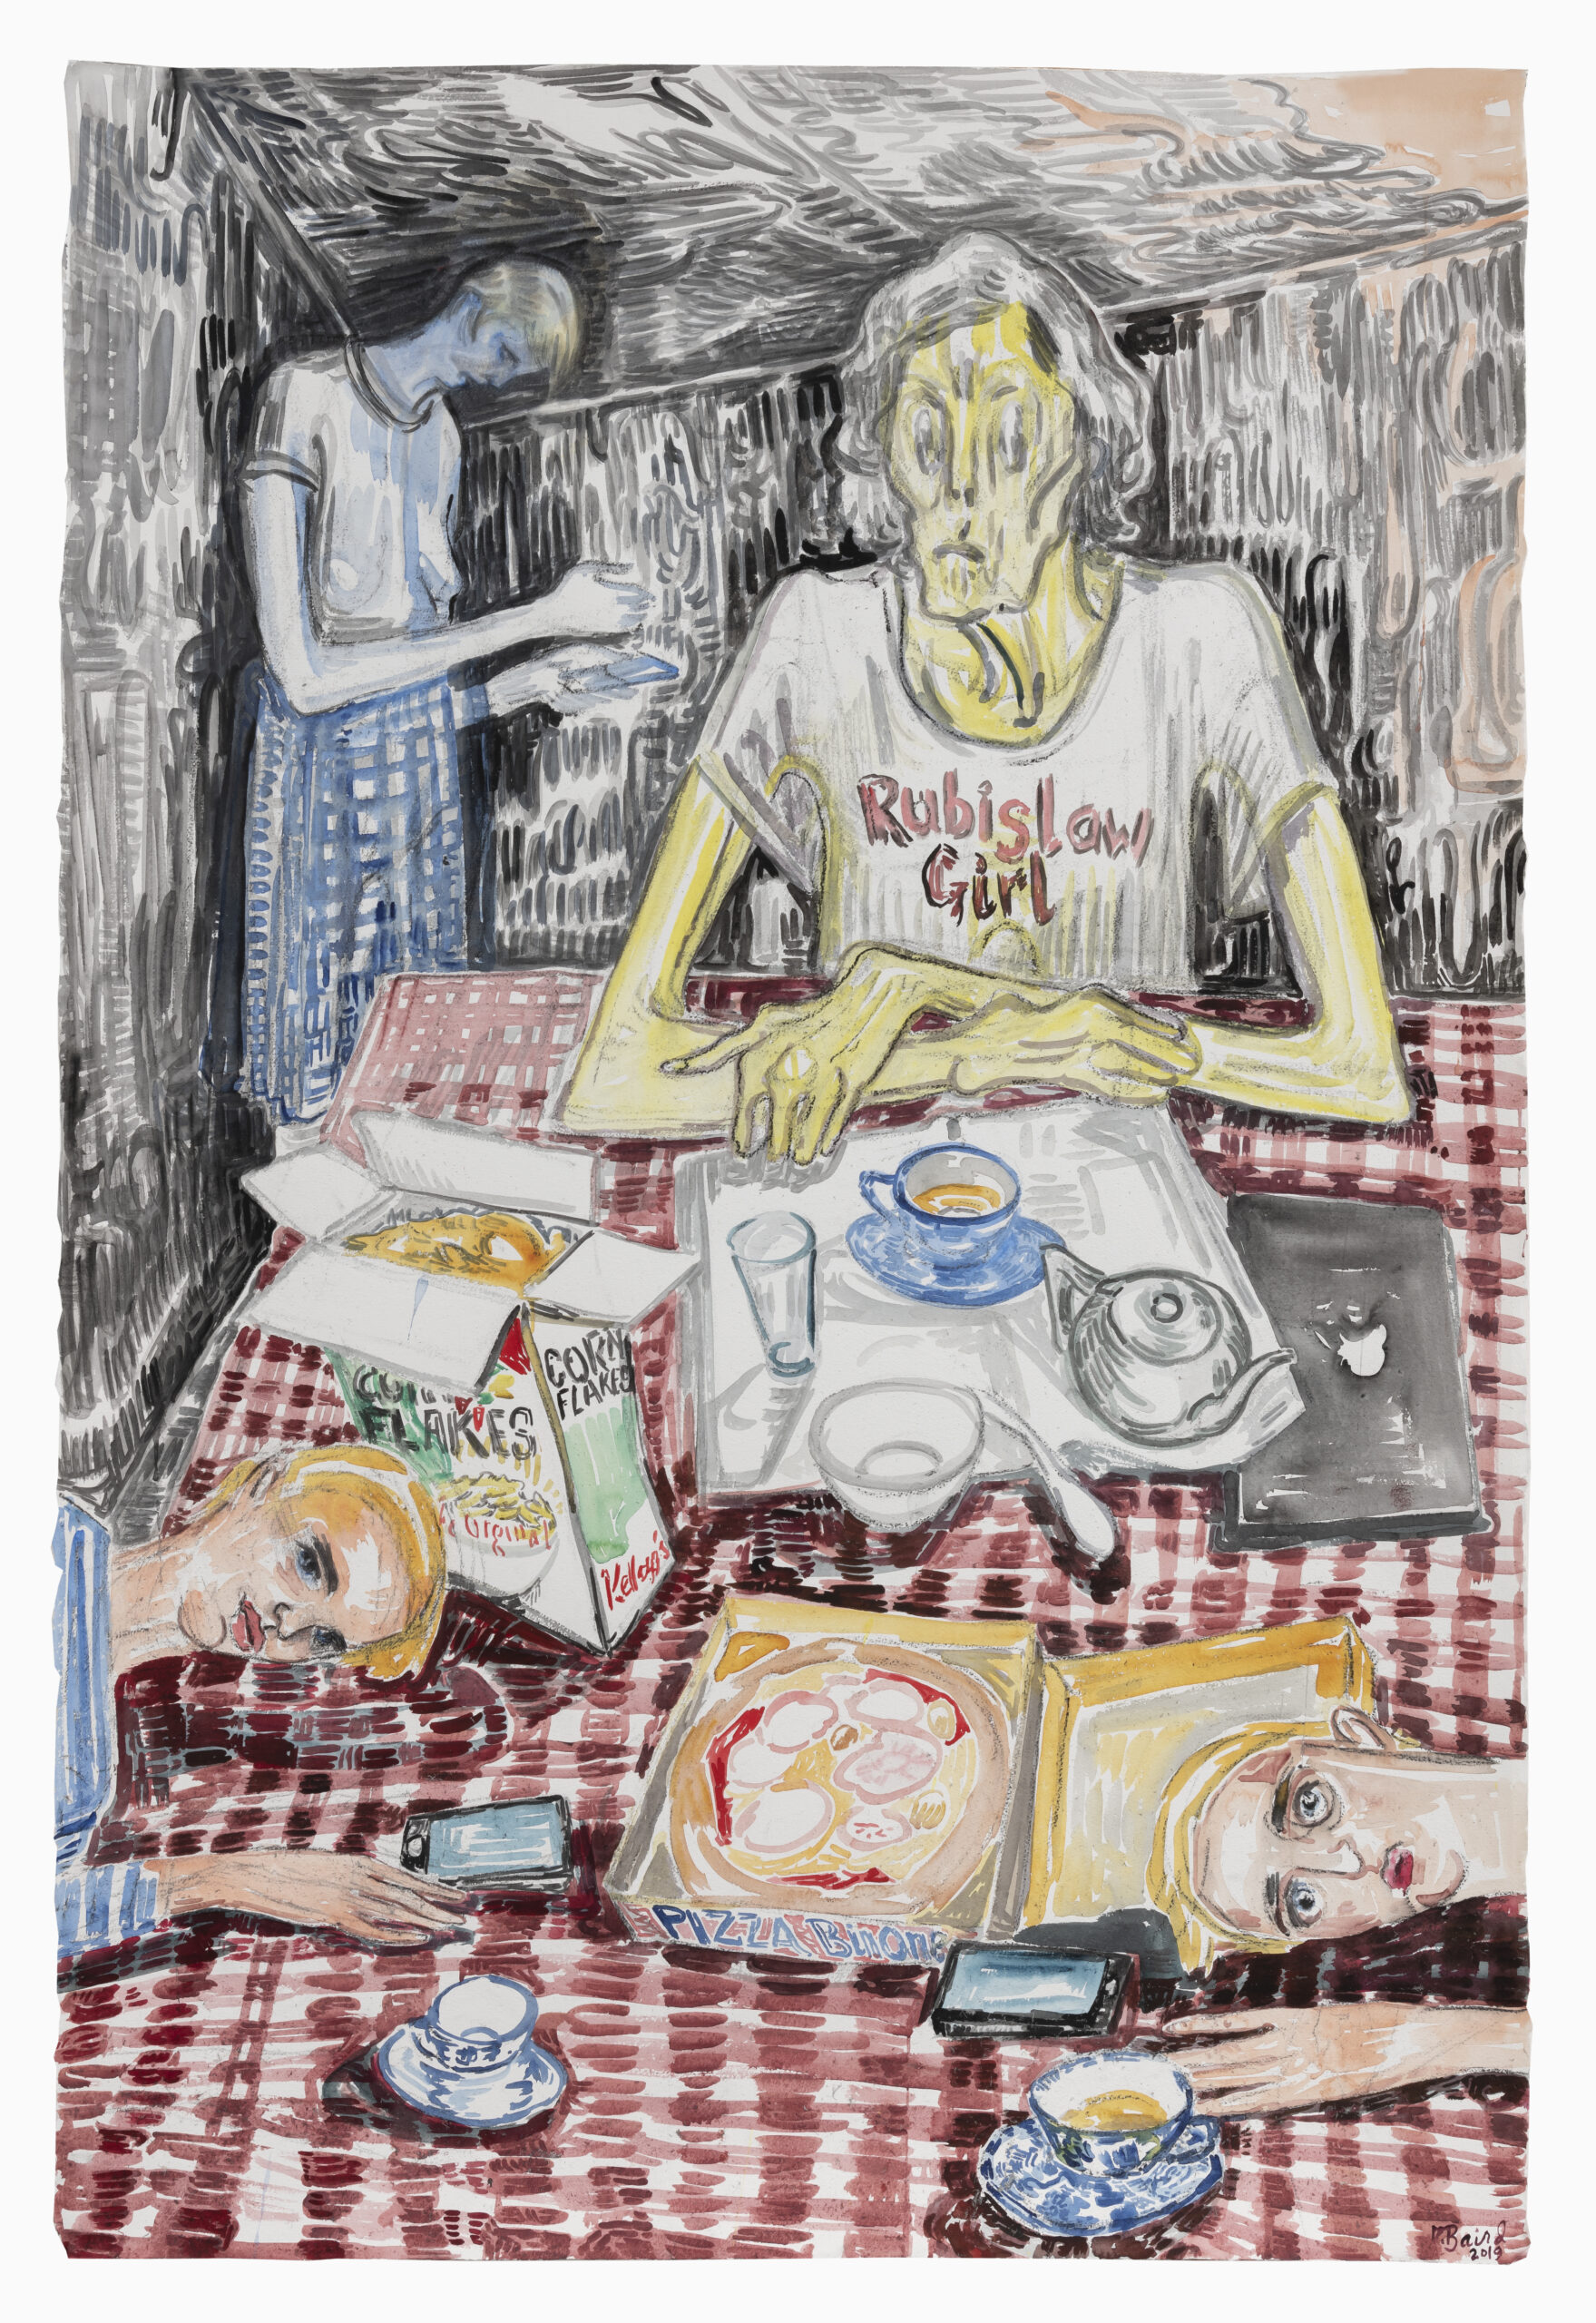 Painting of three women sitting at a table with takeaway pizza boxes, cups of tea, corn flakes, an apple laptop and phones on the table. One figure is in the background.